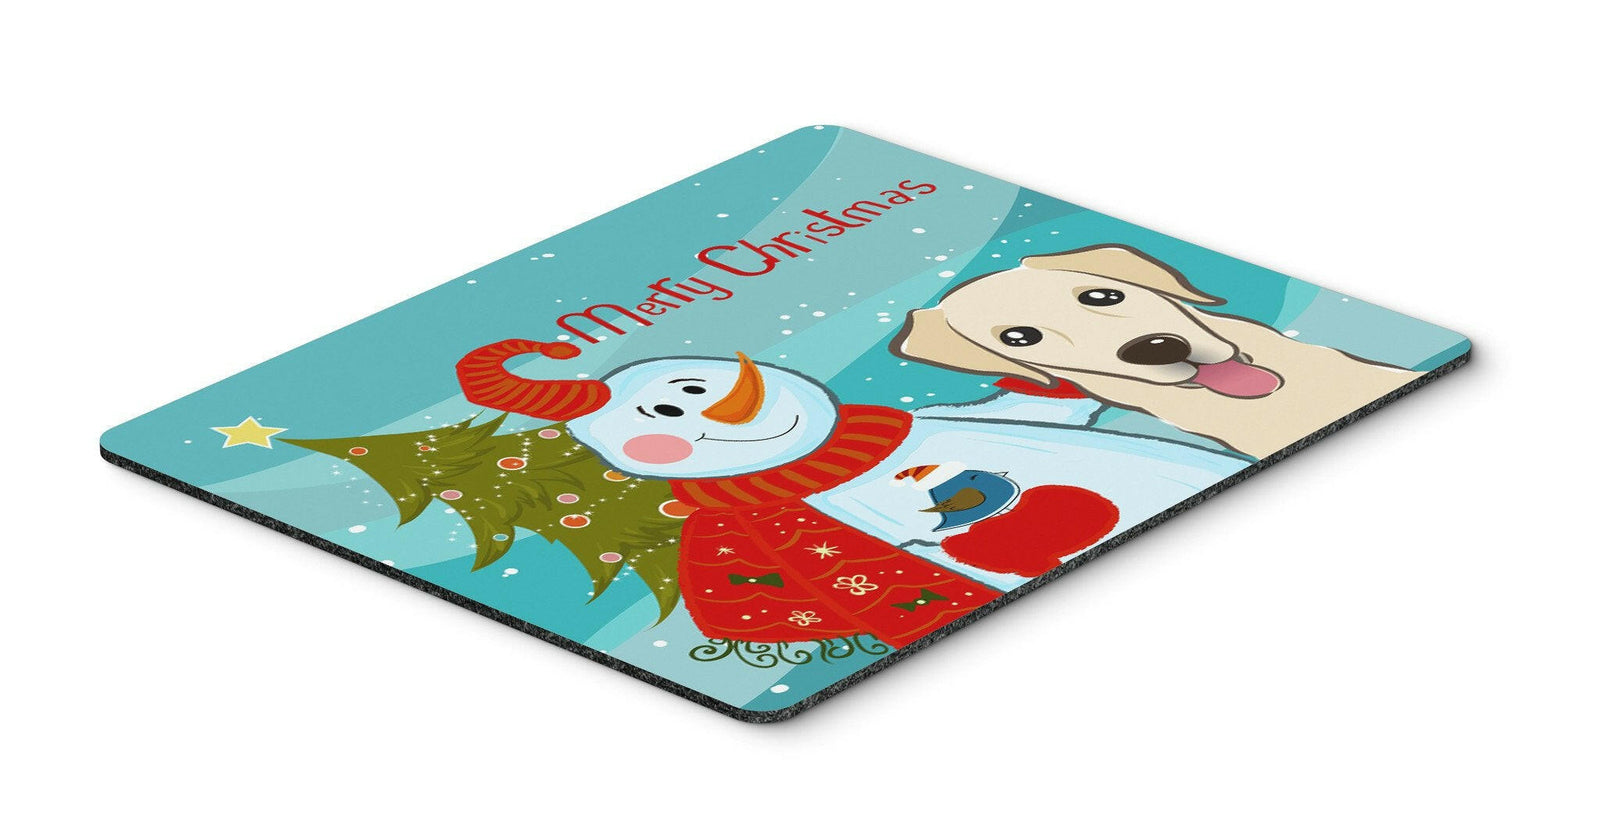 Snowman with Golden Retriever Mouse Pad, Hot Pad or Trivet BB1872MP by Caroline's Treasures